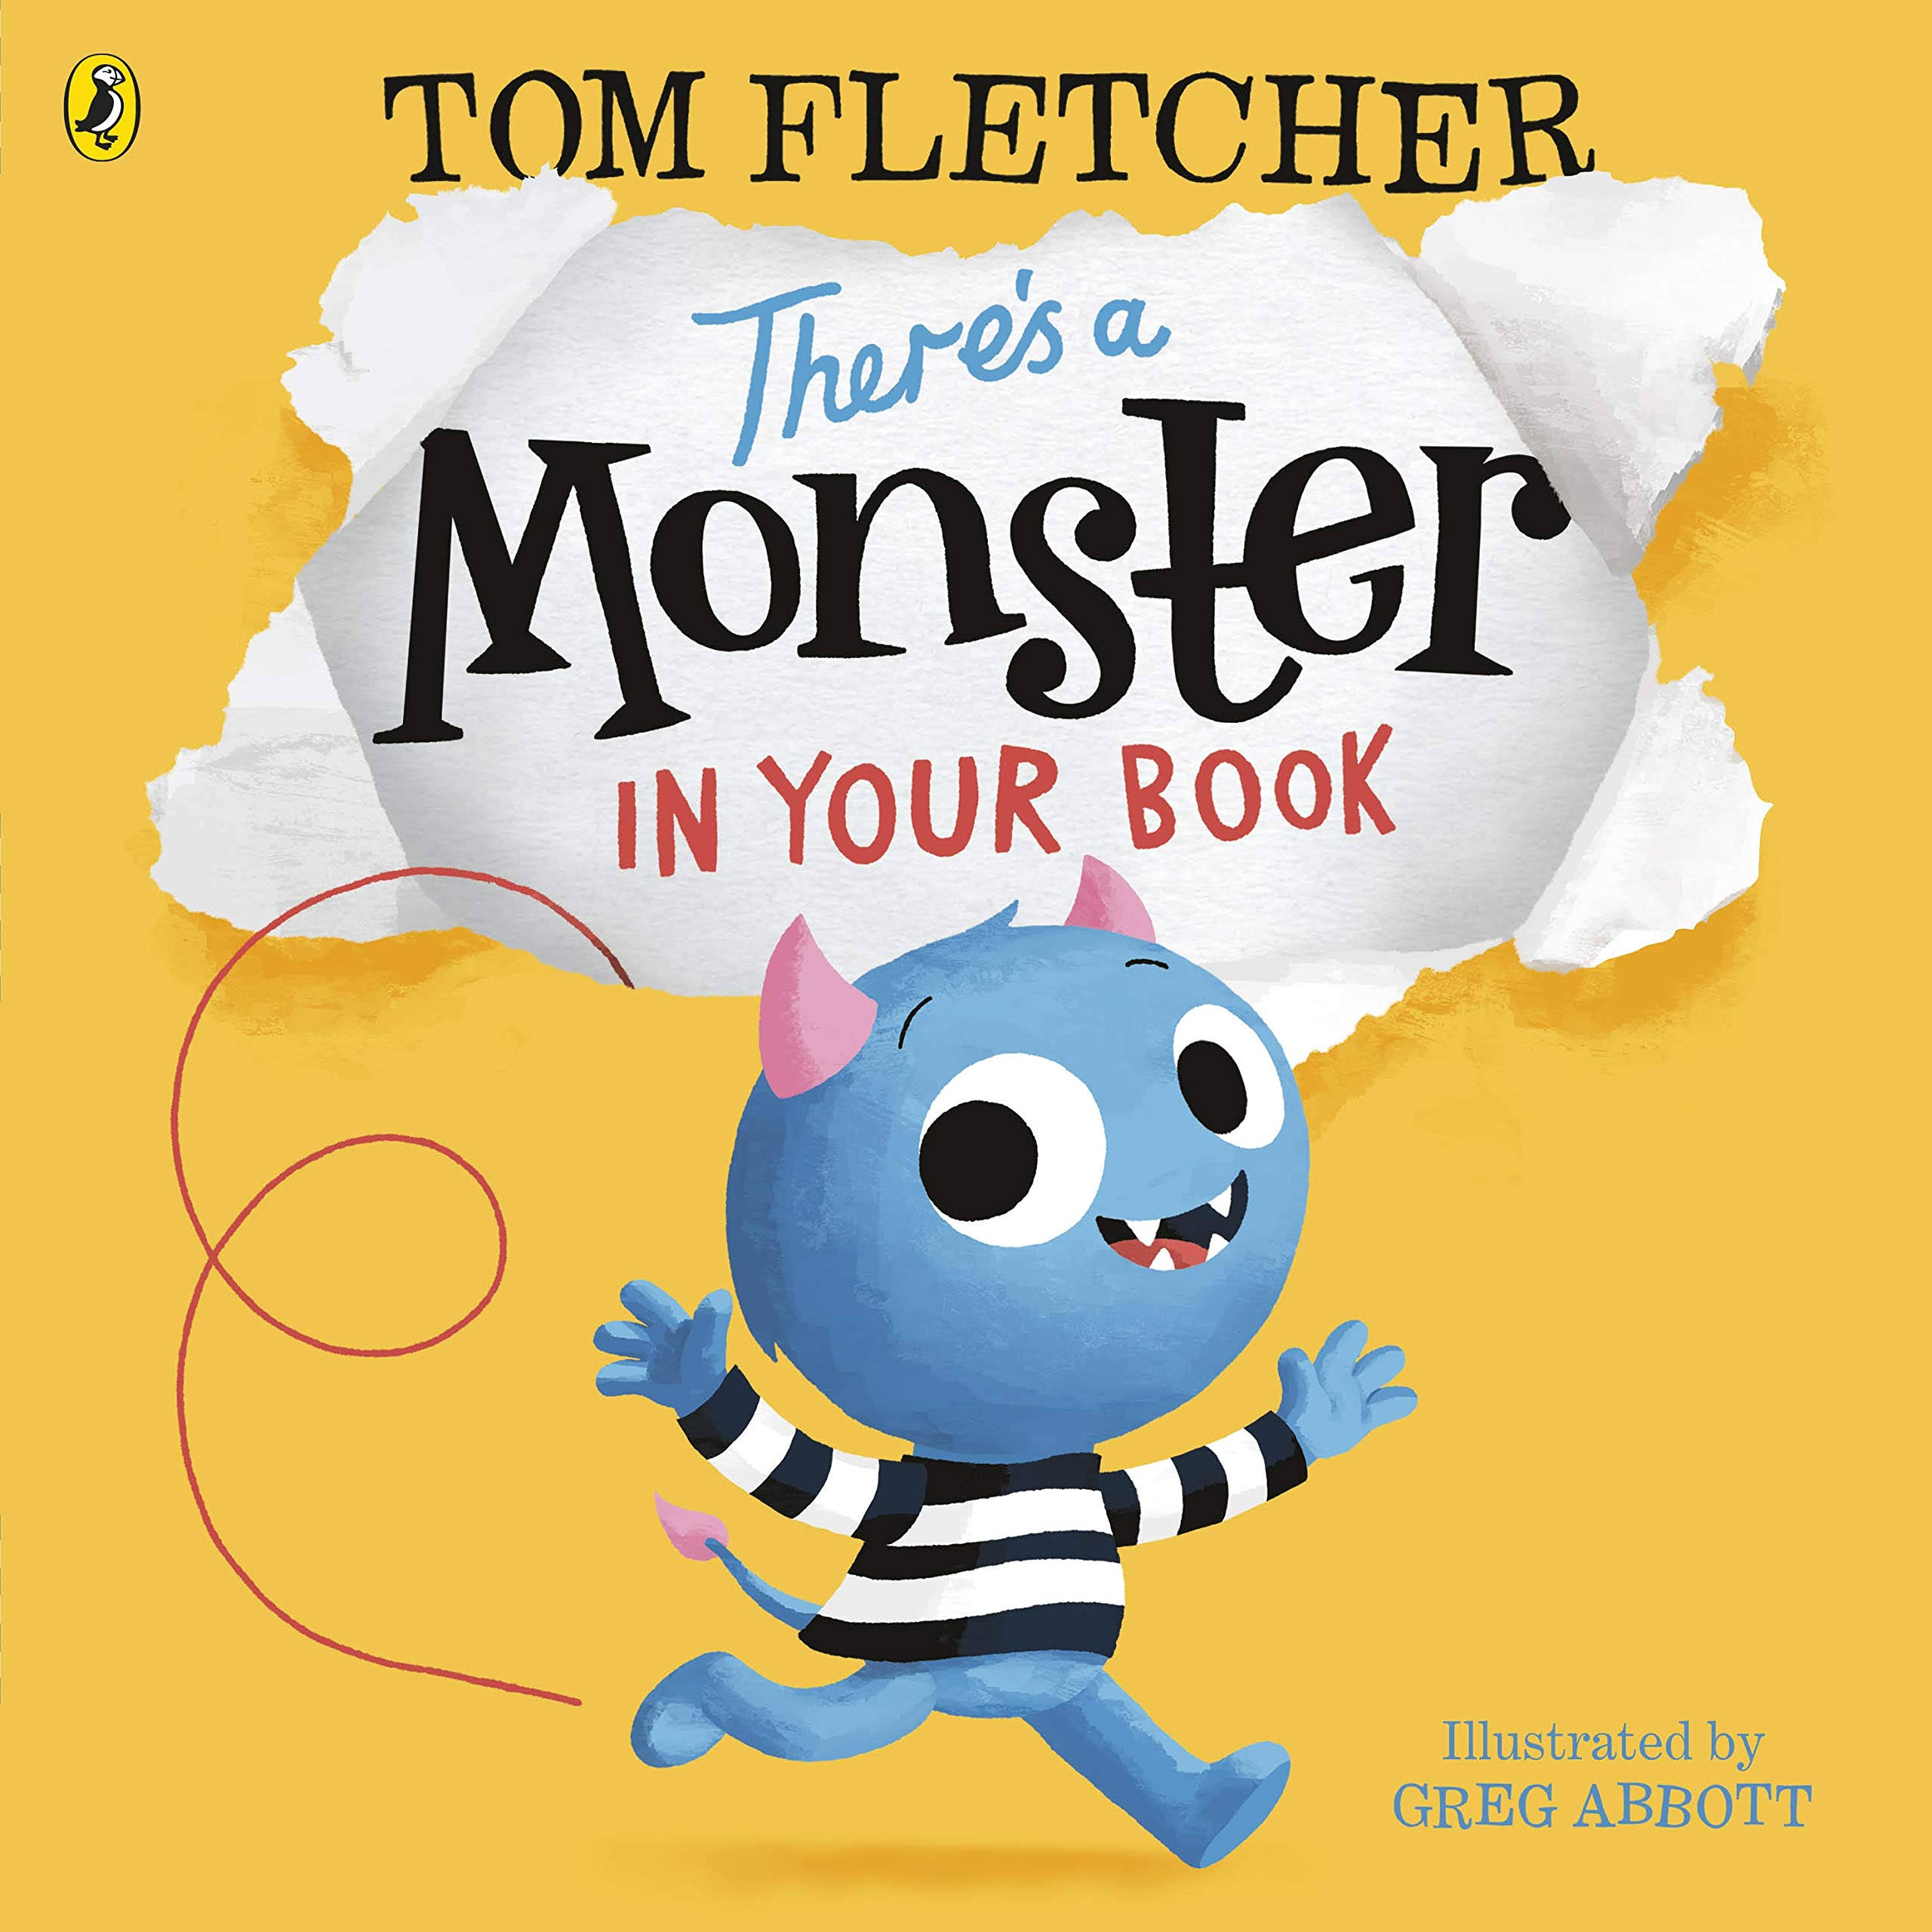 There's a Monster in your Book - Tom Fletcher